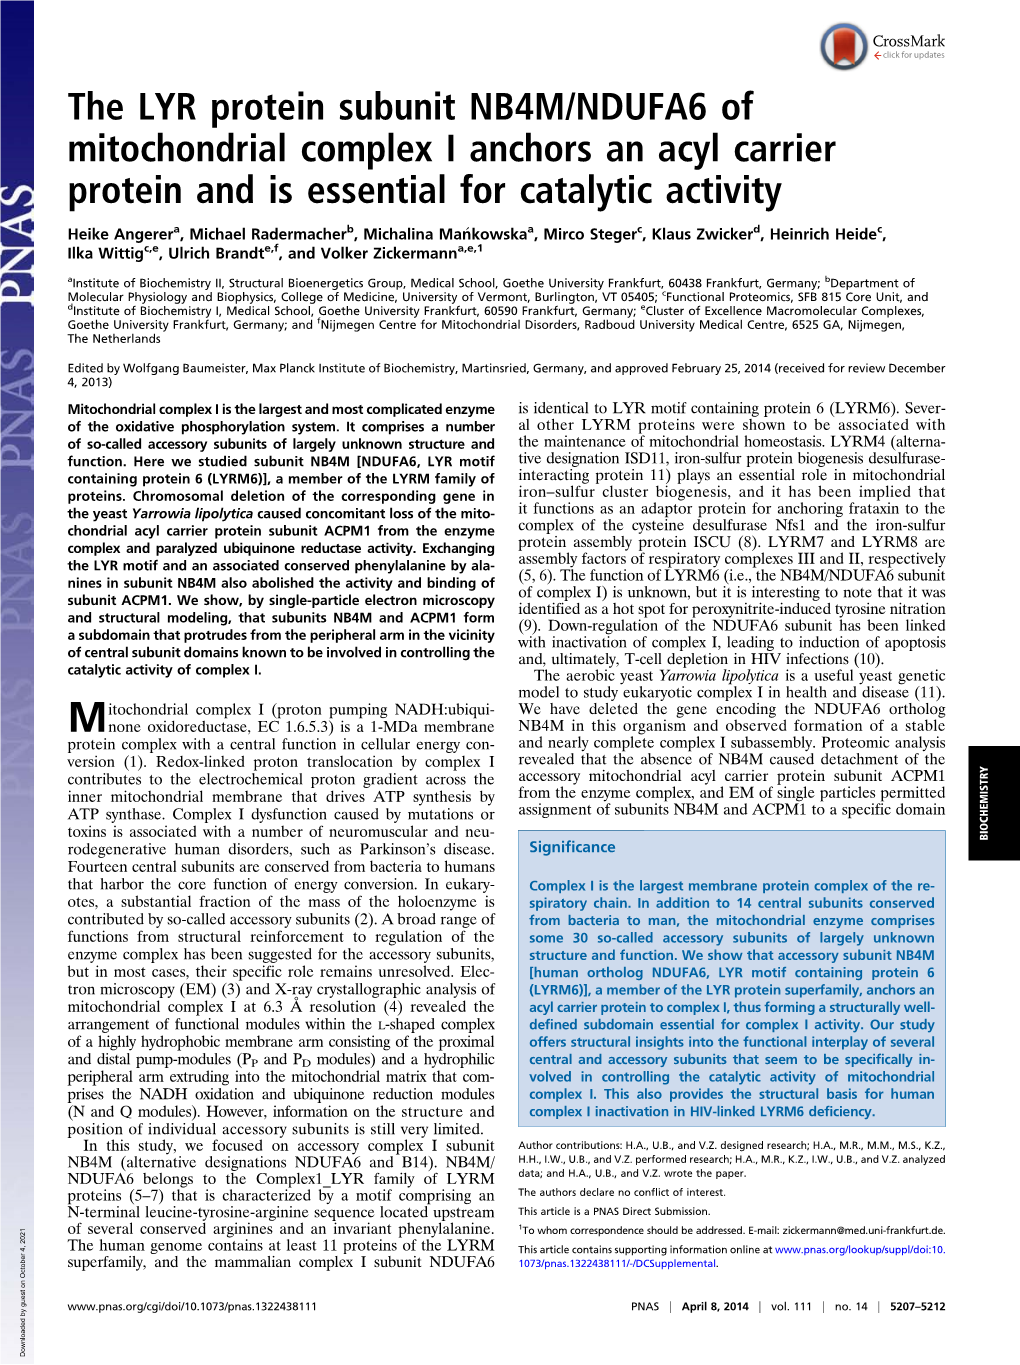 The LYR Protein Subunit NB4M/NDUFA6 of Mitochondrial Complex I Anchors an Acyl Carrier Protein and Is Essential for Catalytic Activity